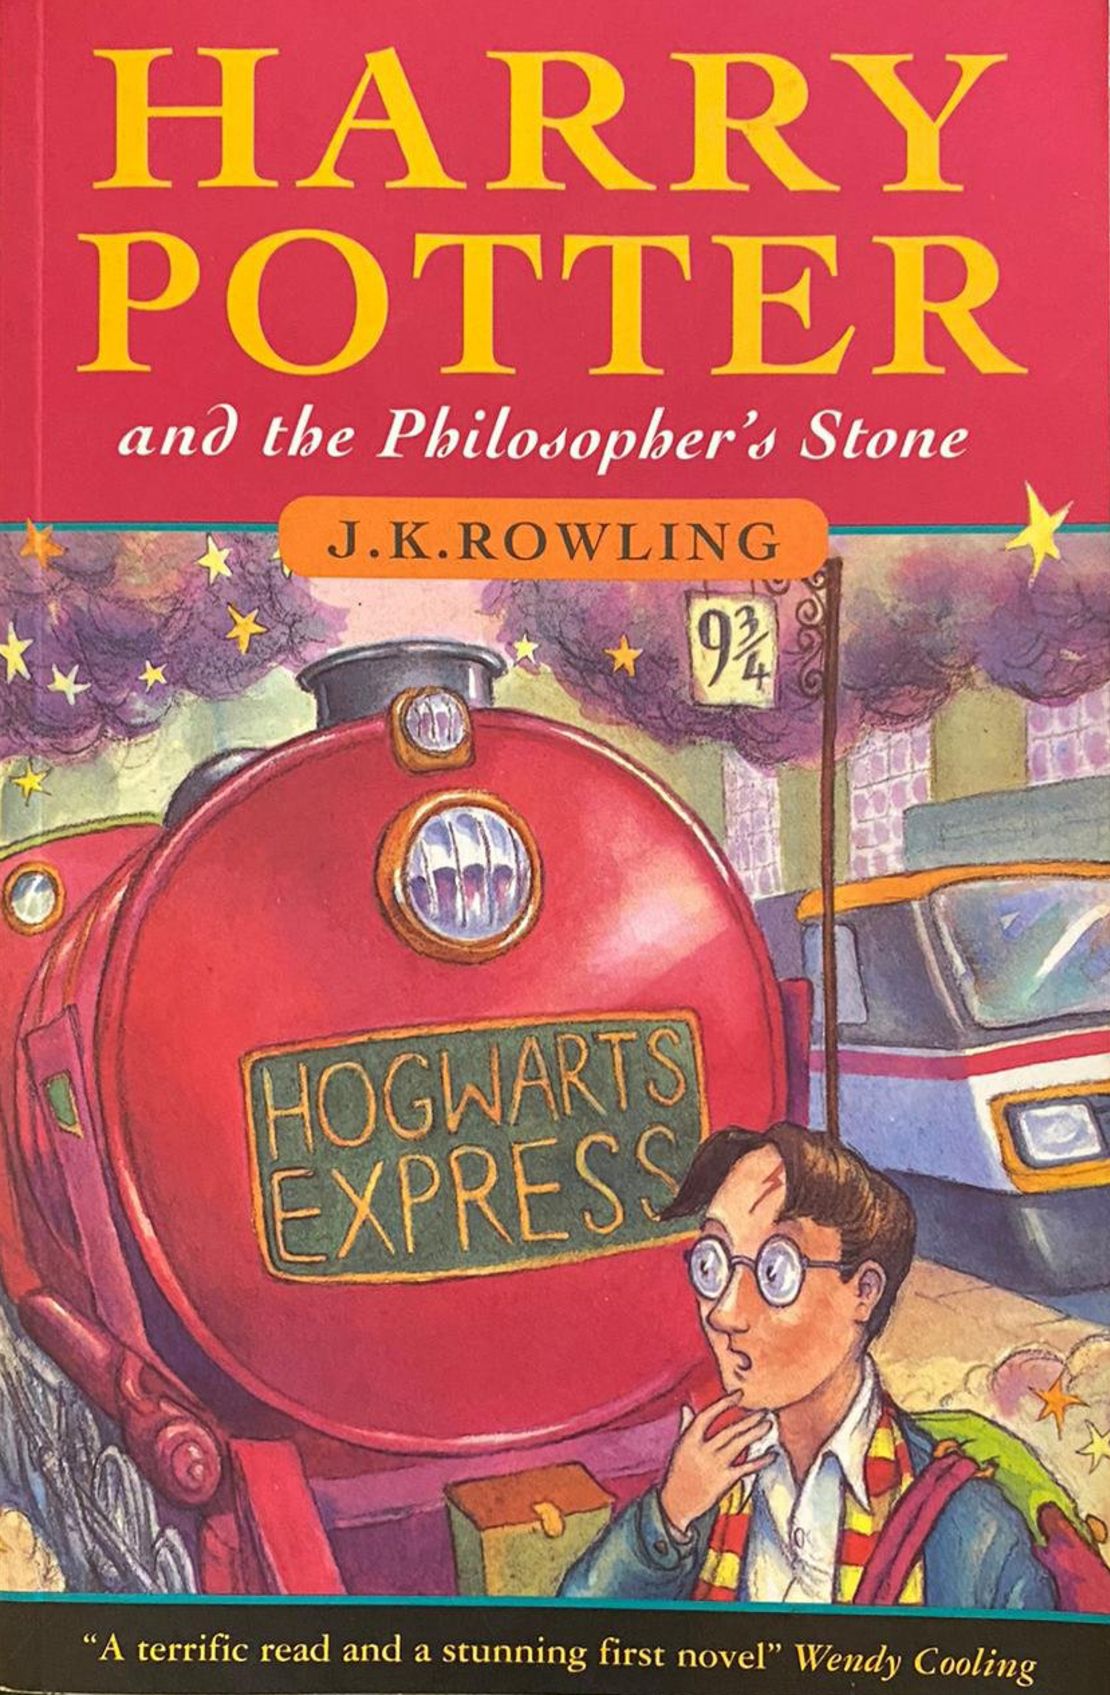 The first edition of 1997 book "Harry Potter and the Philosopher's Stone," which Taylor illustrated.